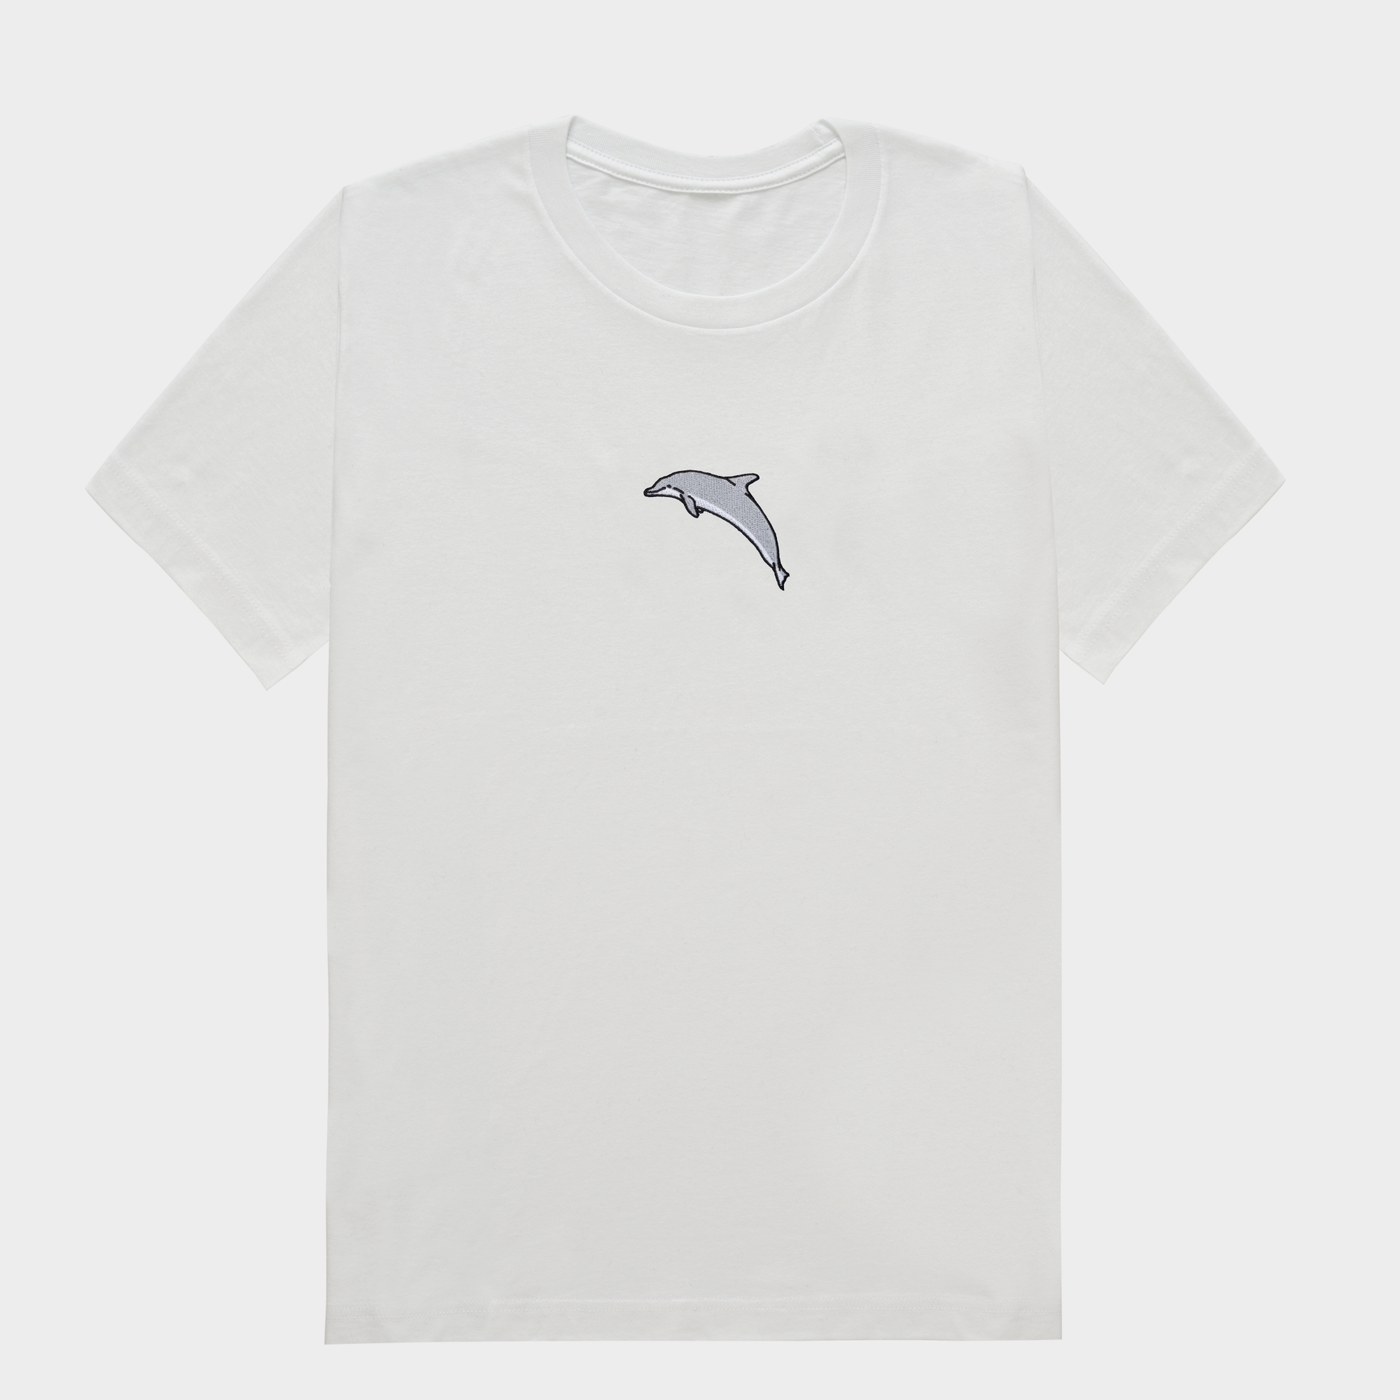 Bobby's Planet Women's Embroidered Dolphin T-Shirt from Seven Seas Fish Animals Collection in White Color#color_white